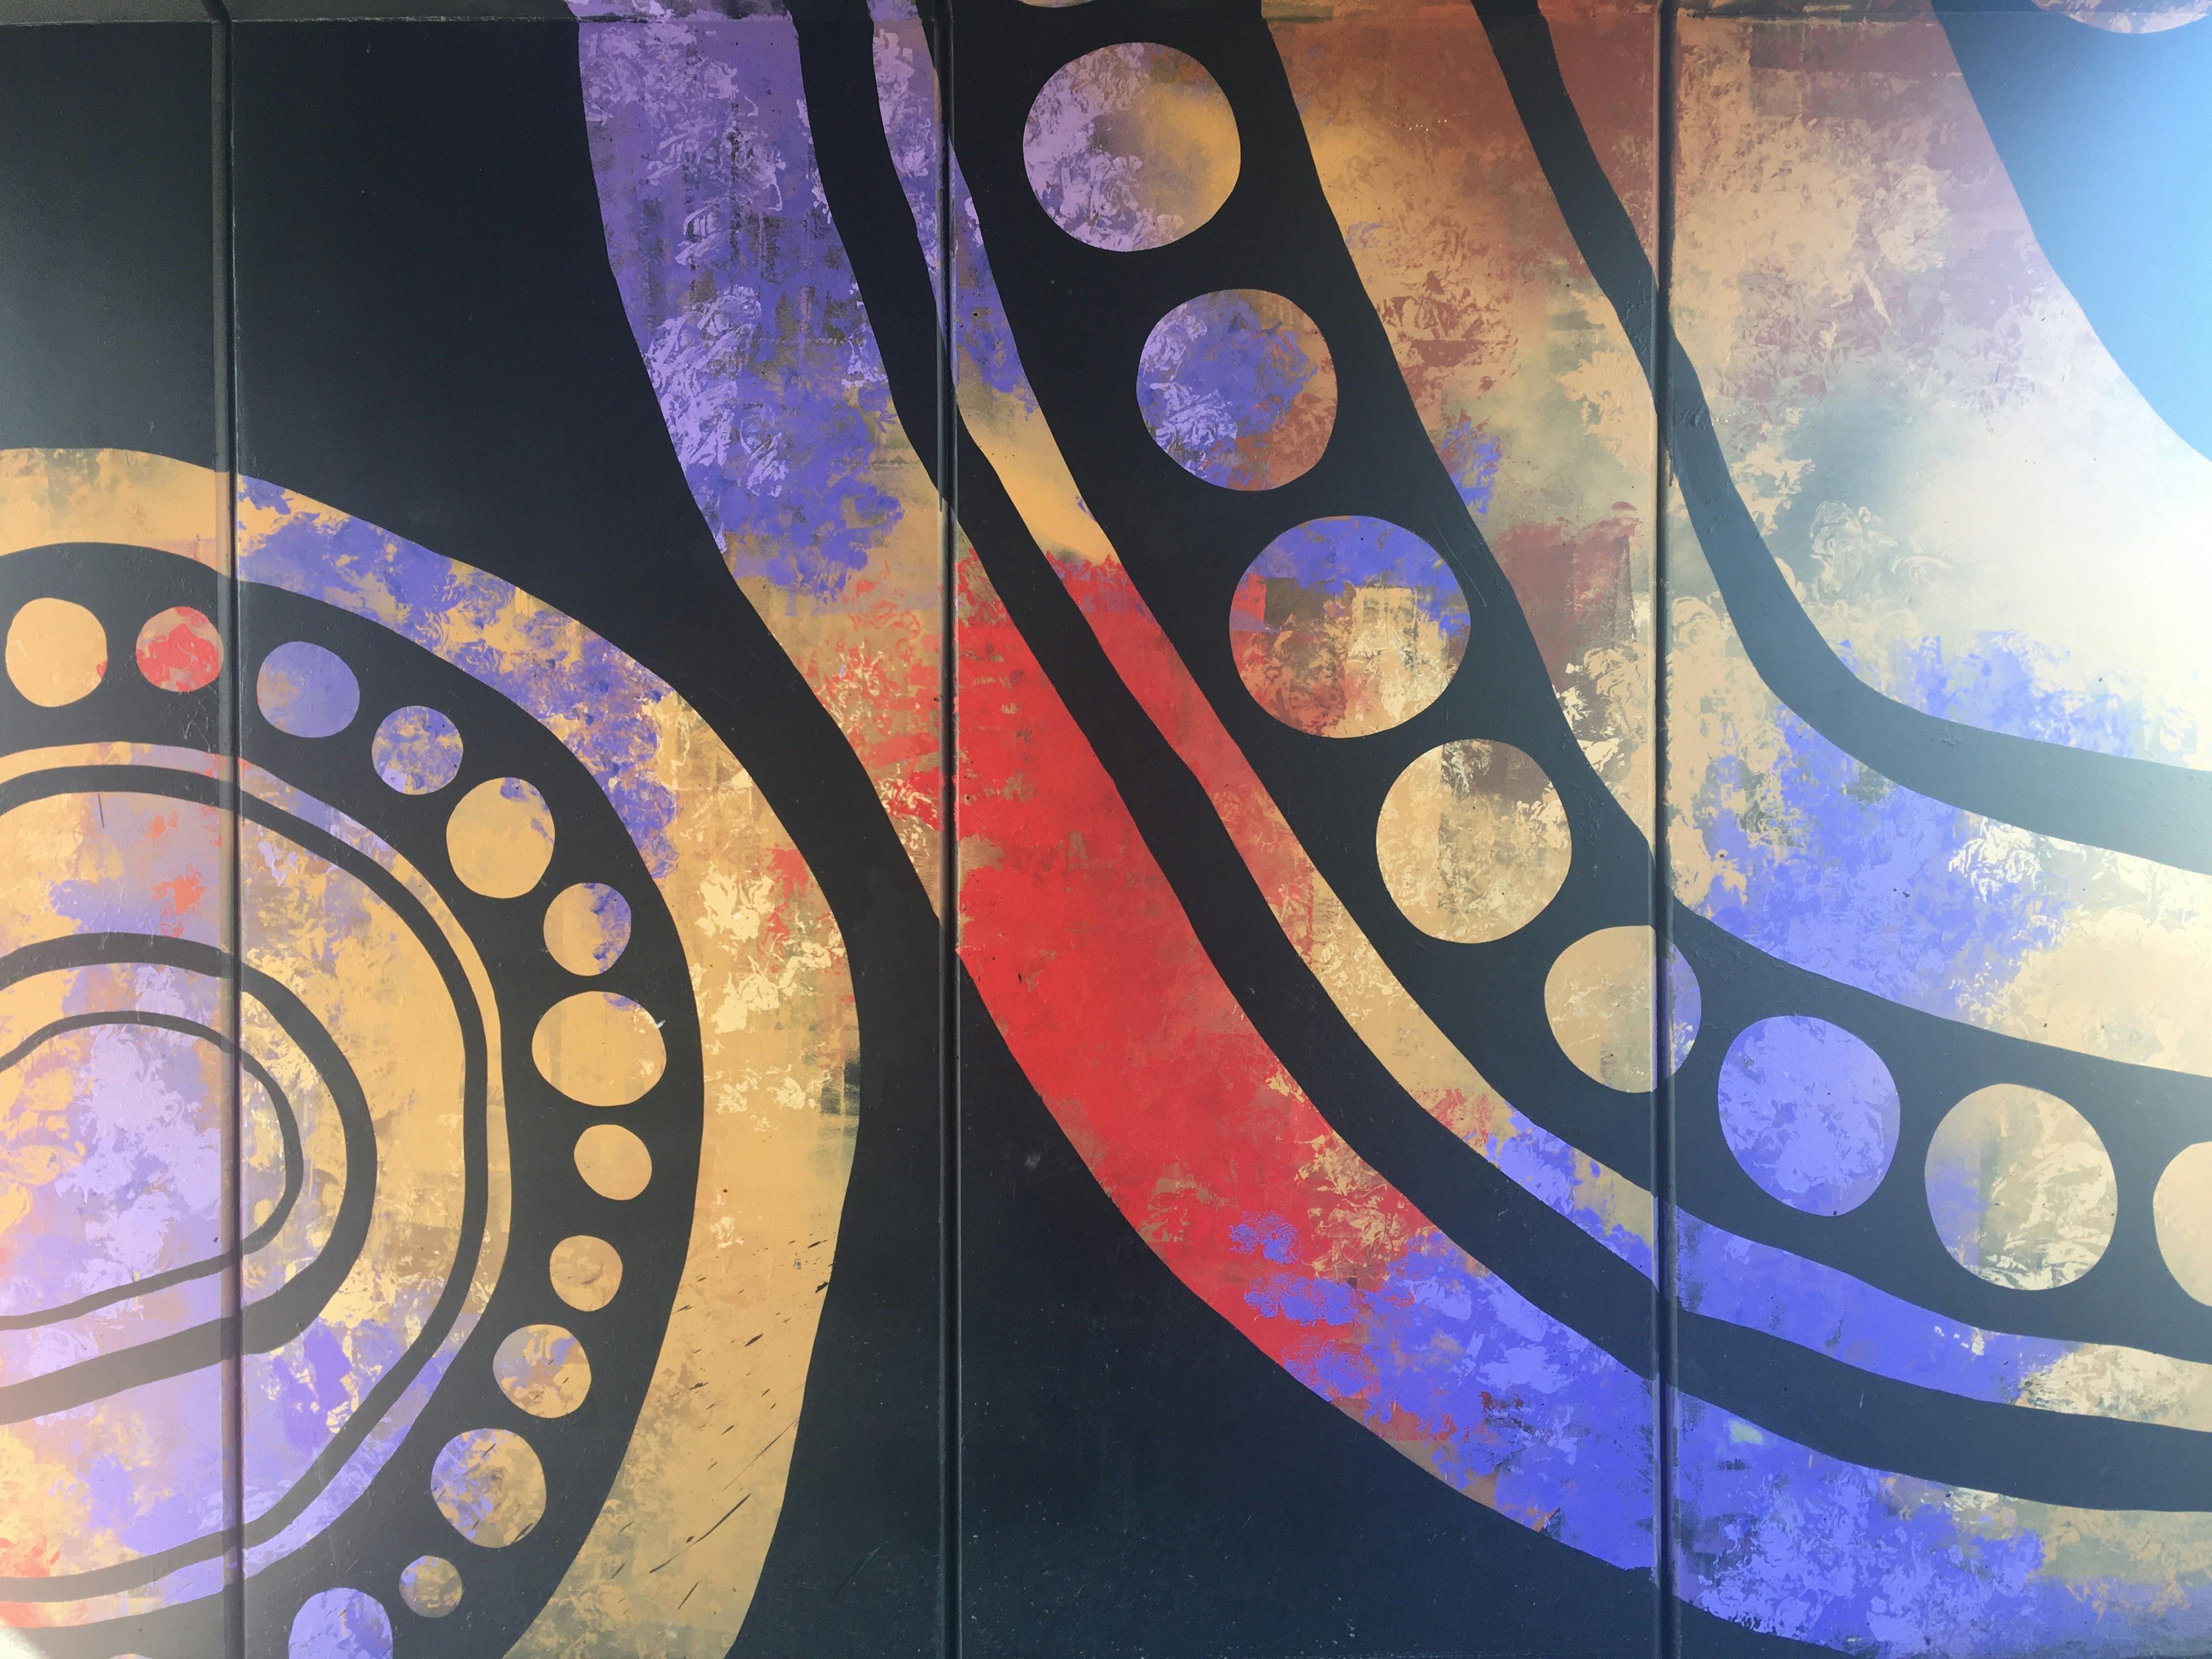 “Flinders Link mural” 2020. Birch Crescent and Lynton Avenue, Mitchell Park by Elizabeth Close. Commissioned by City of Marion